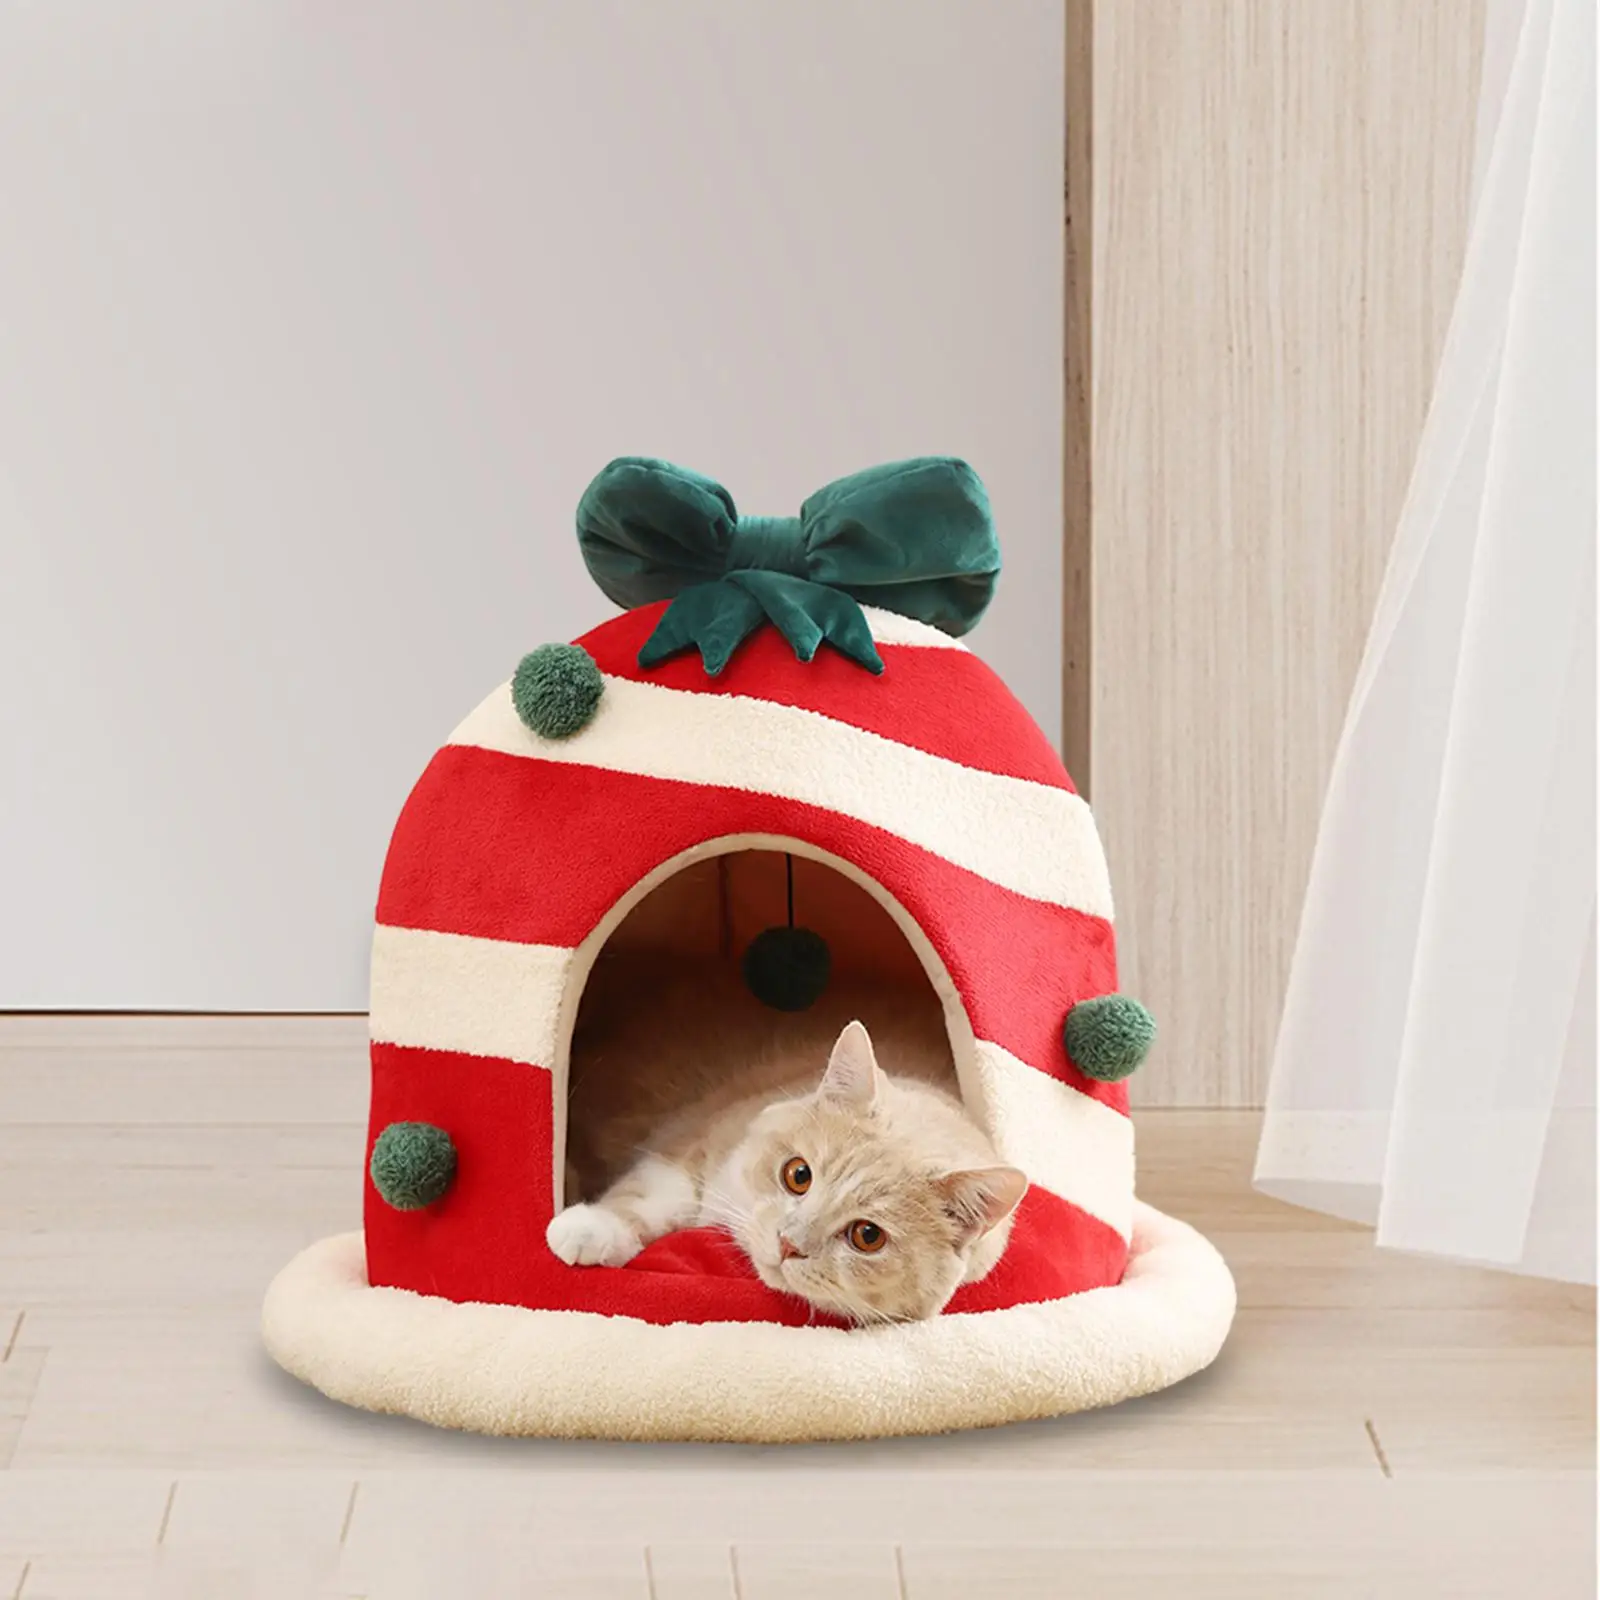 Christmas Cat Beds Winter with Playing Ball Comfortable Warm Soft Christmas Cat House Beds for Christmas Gifts Cats Animals